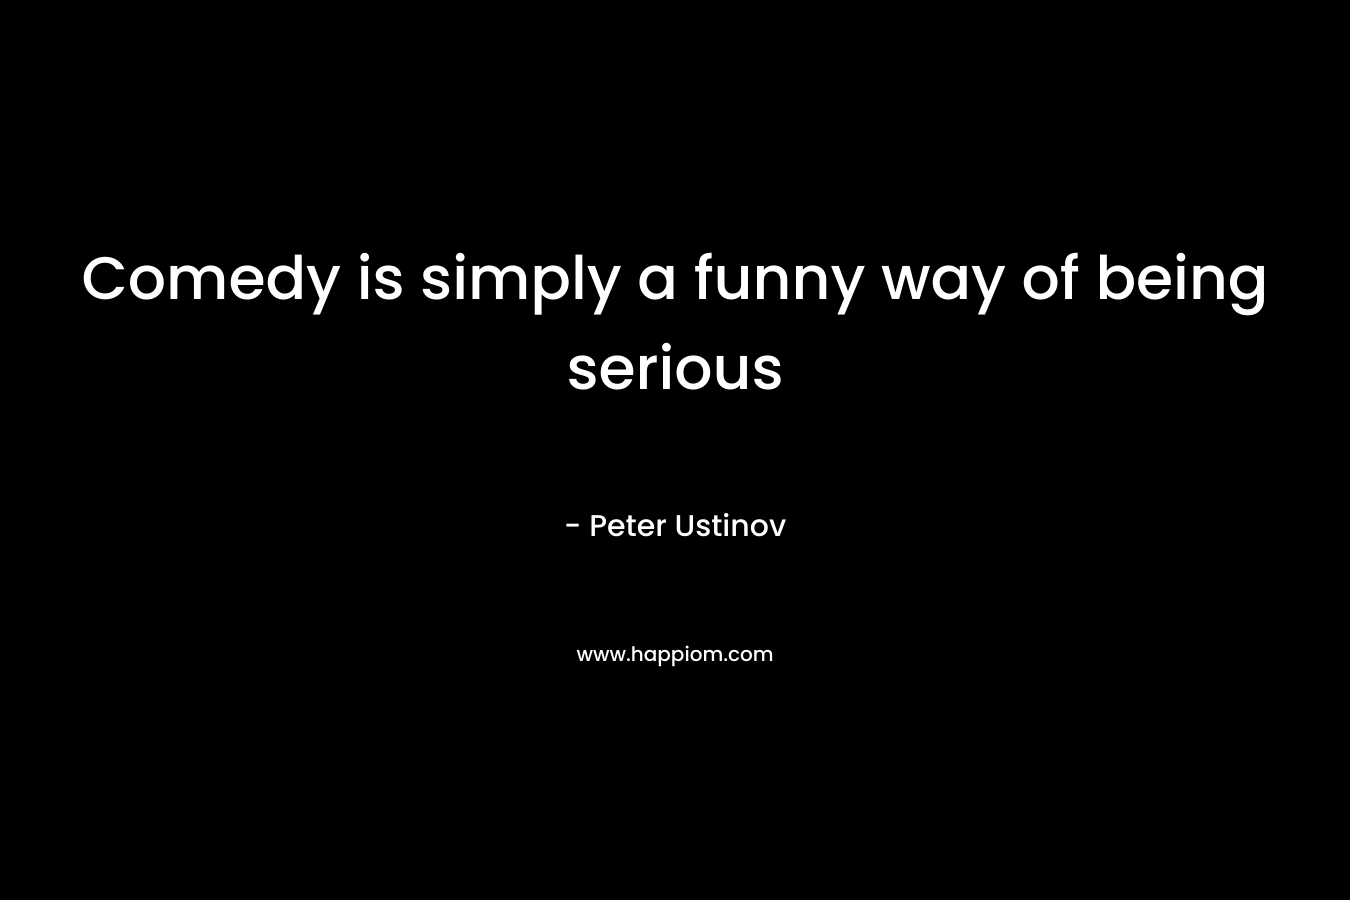 Comedy is simply a funny way of being serious